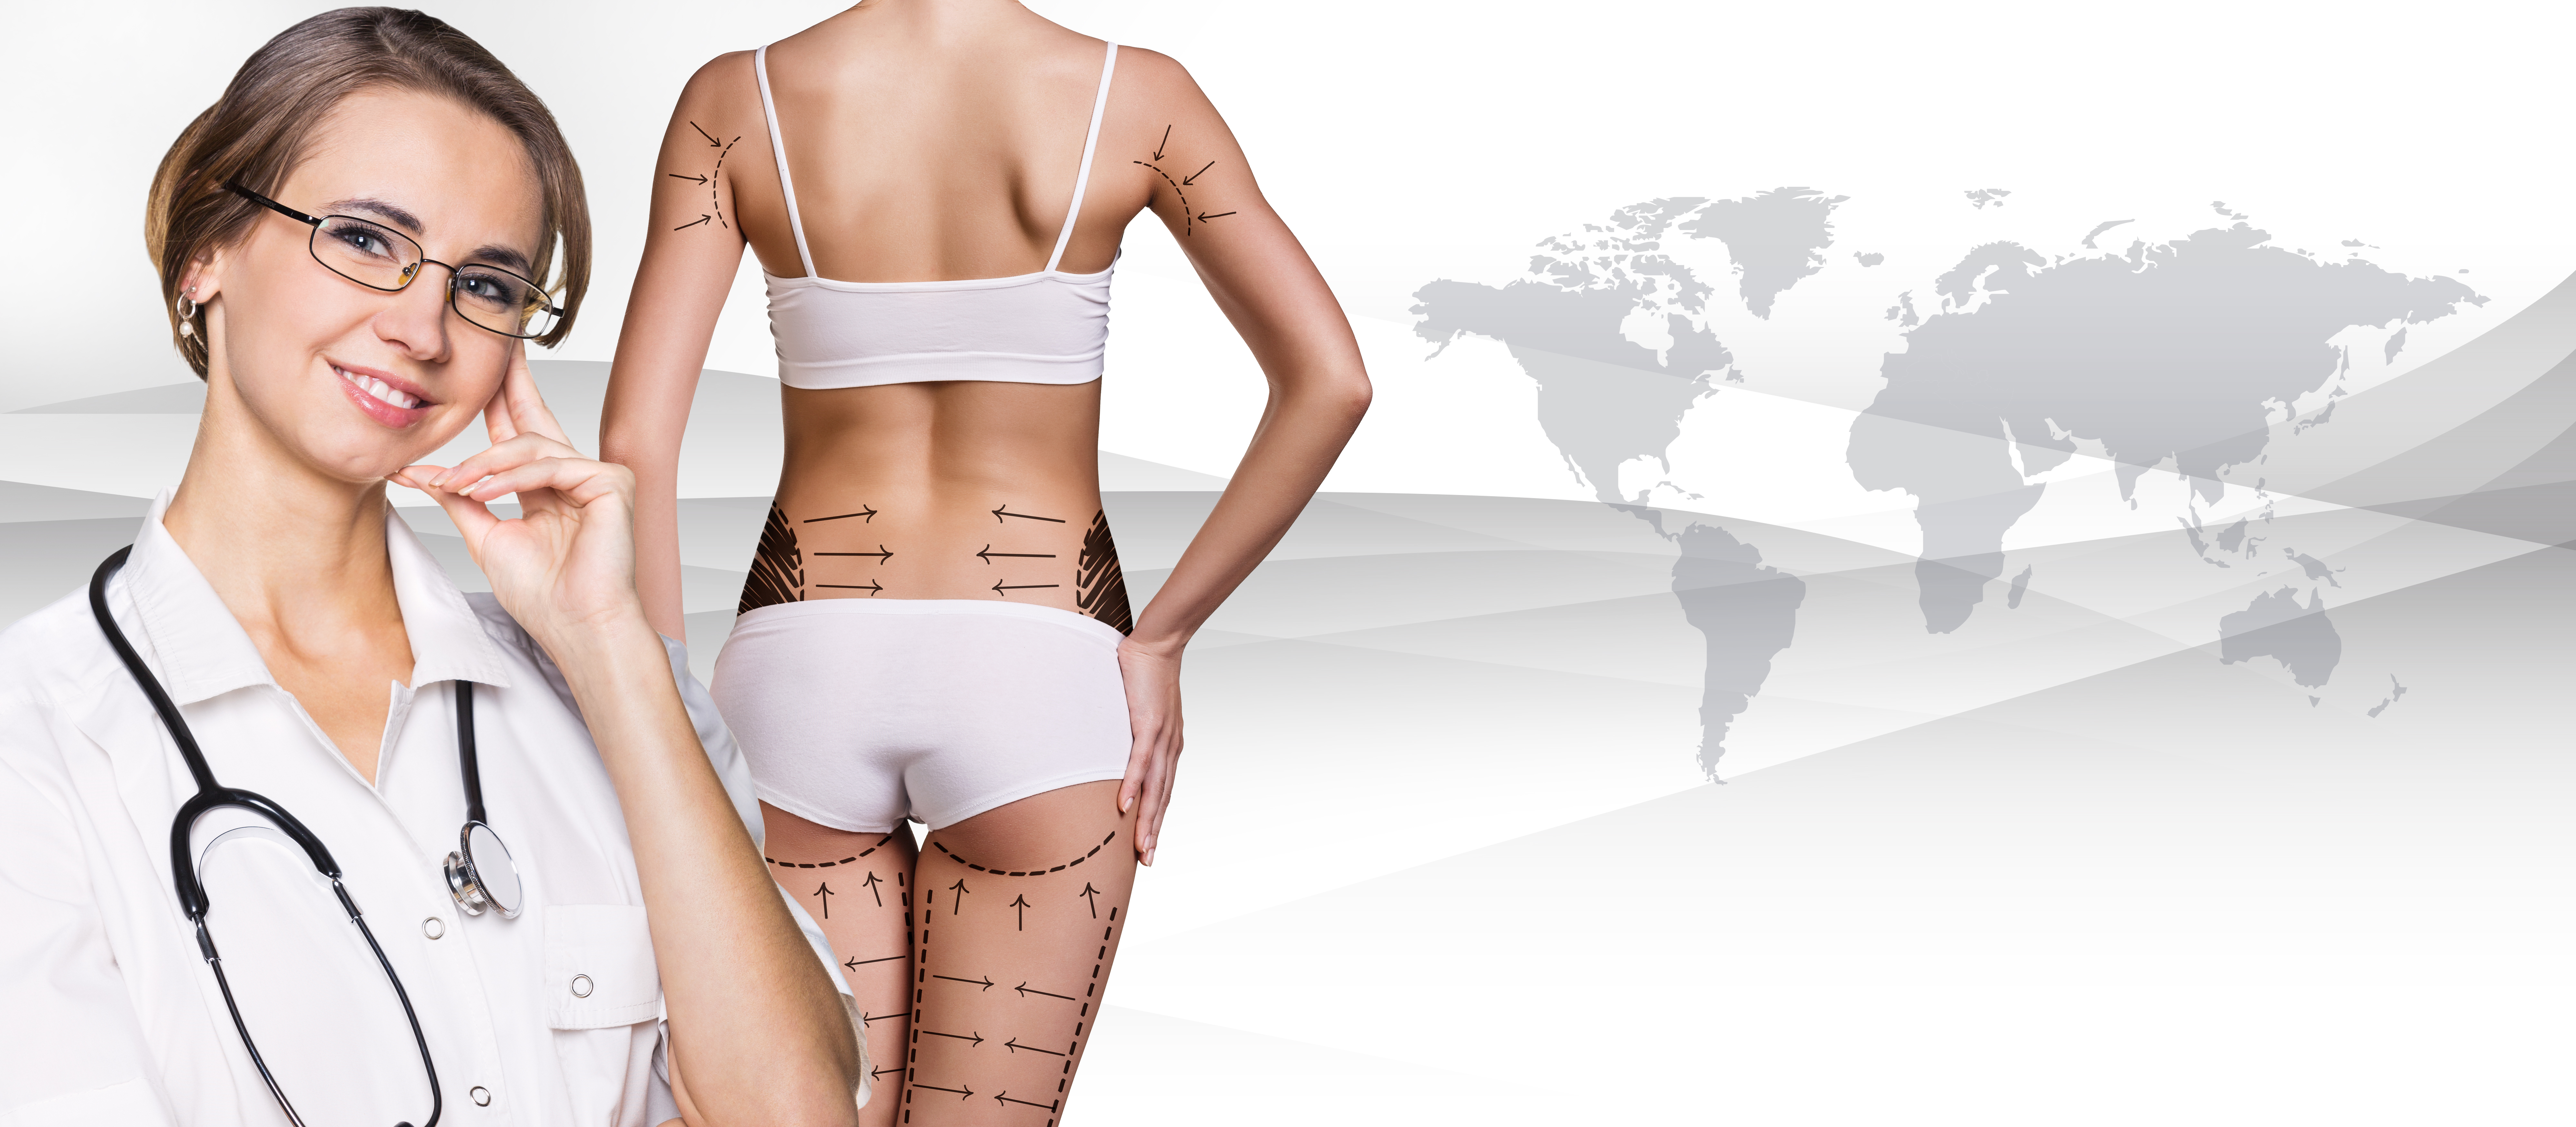 doctor and patient with plastic surgery details on her body with a background map